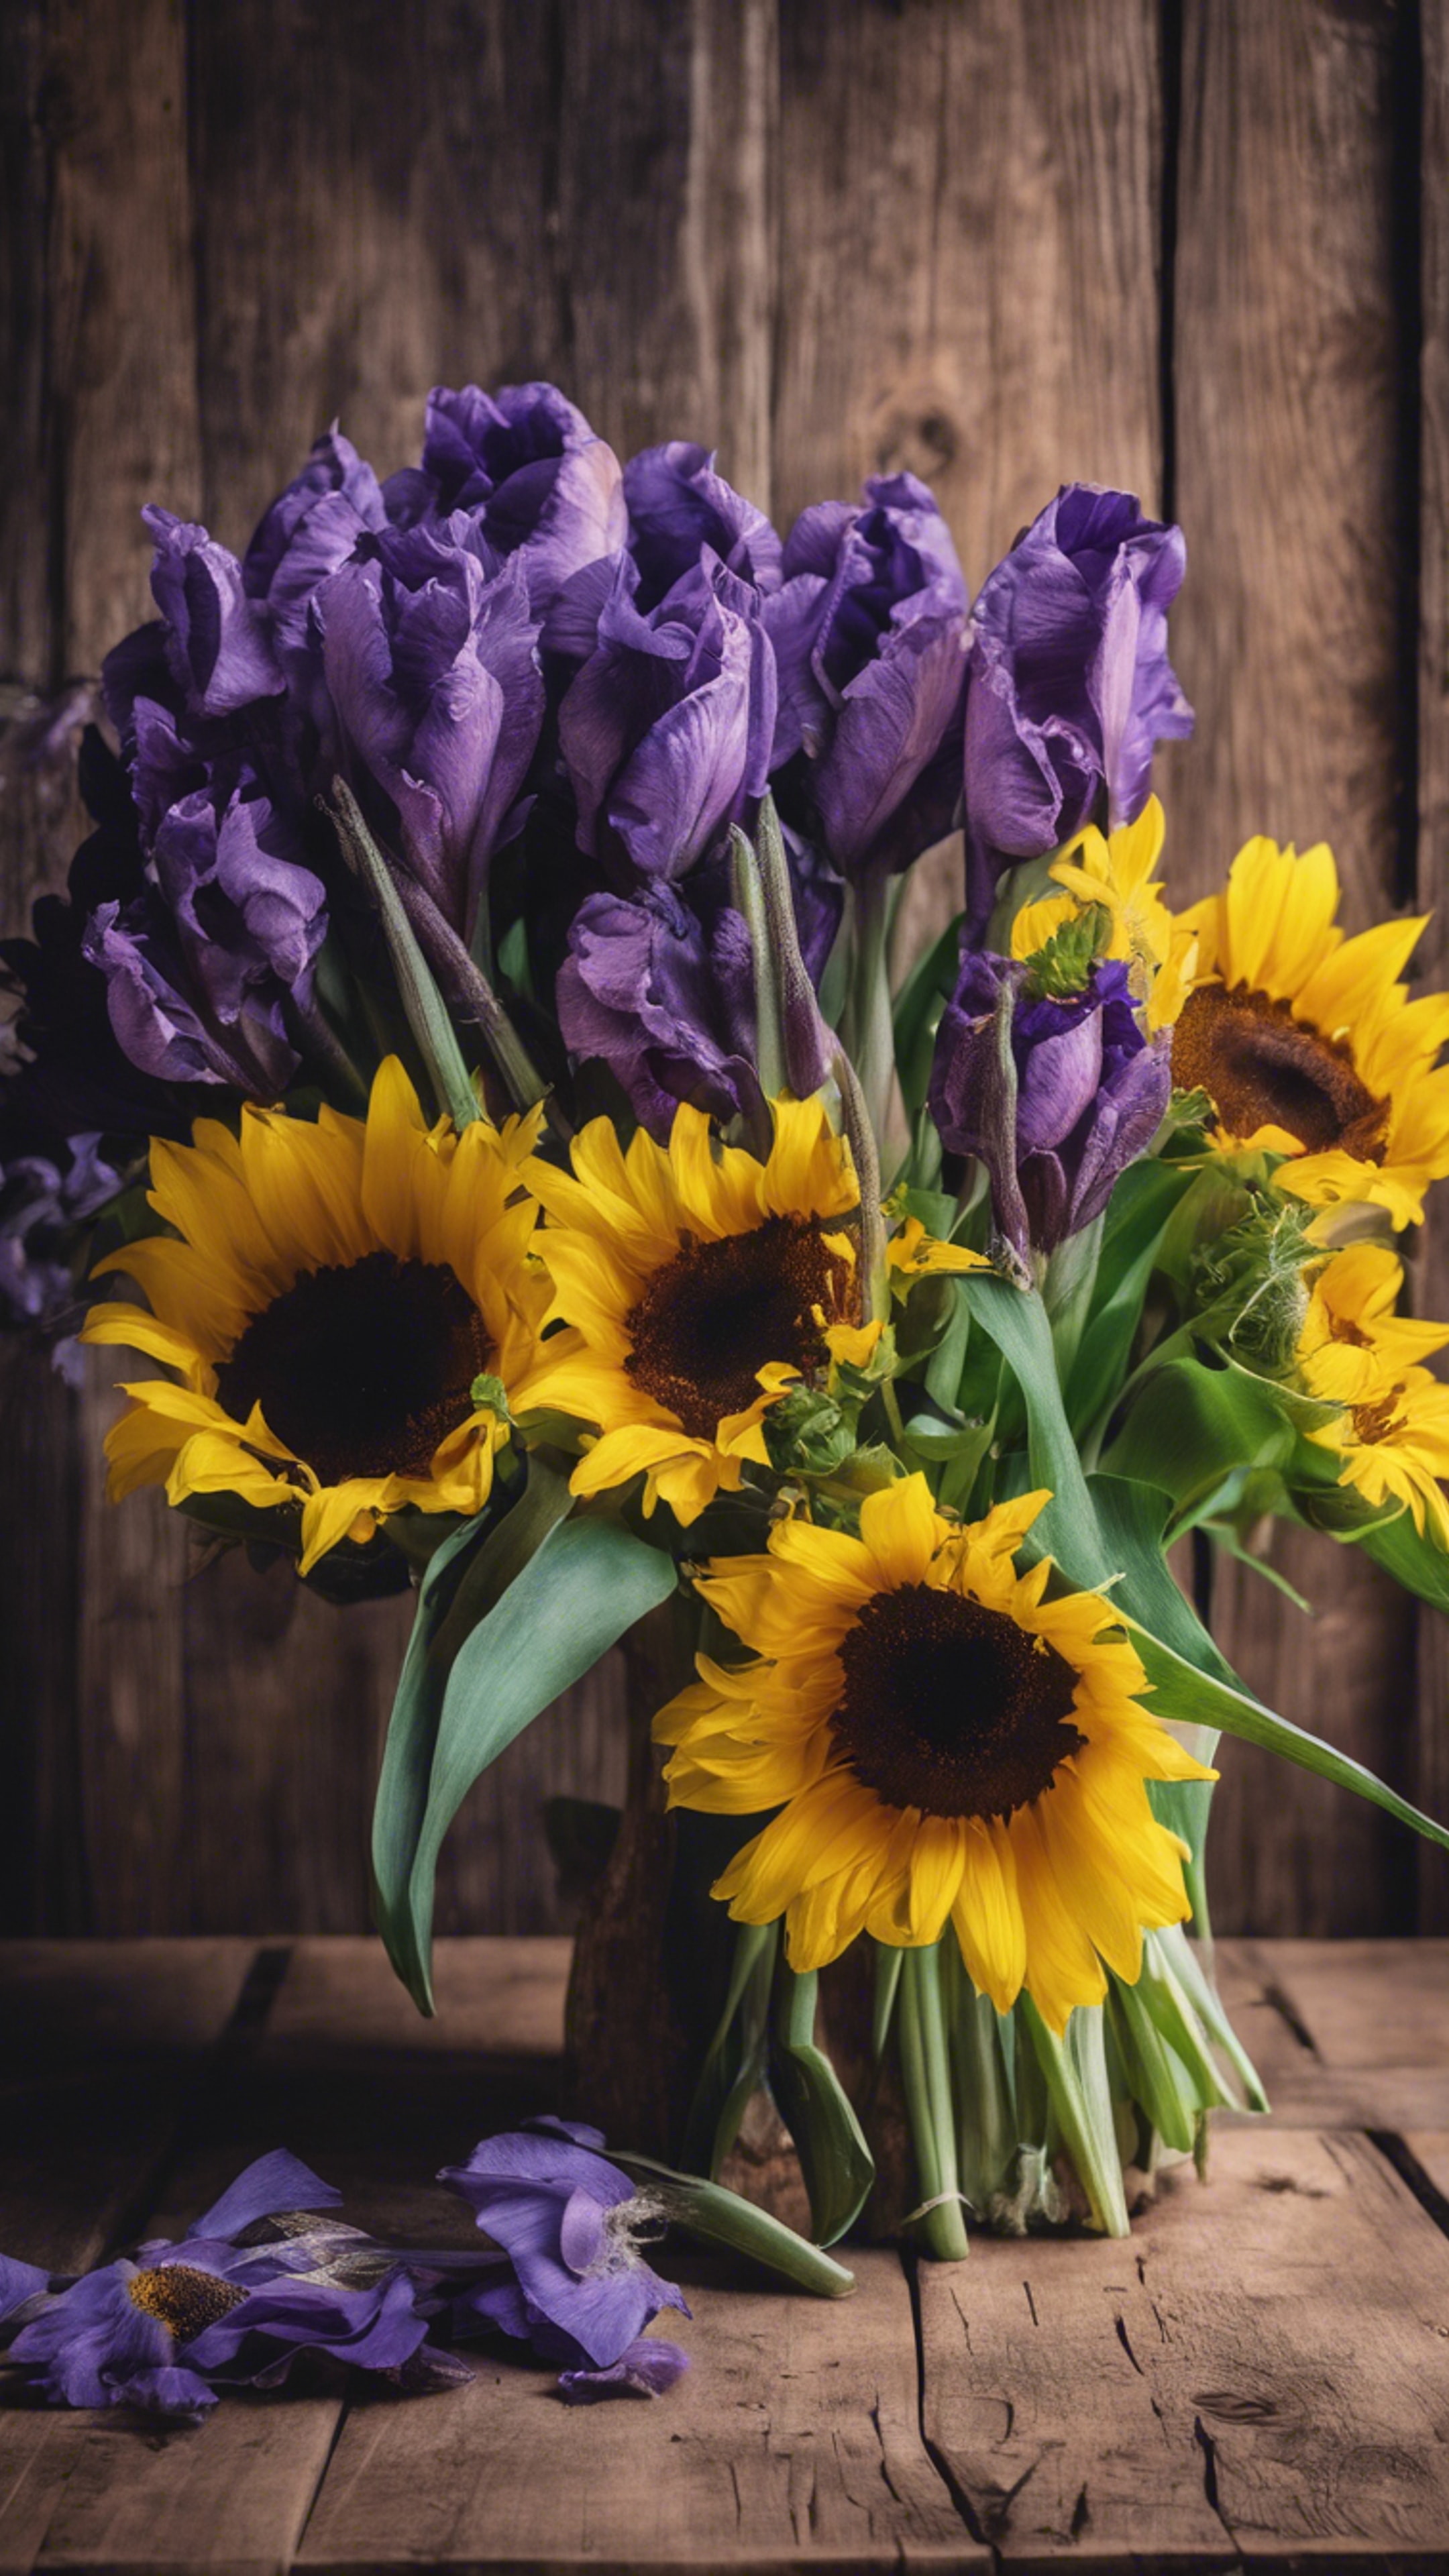 A bouquet of violet irises and bright yellow sunflowers sitting on a rustic wooden table. Дэлгэцийн зураг[036542cc0bff4a9eafa2]